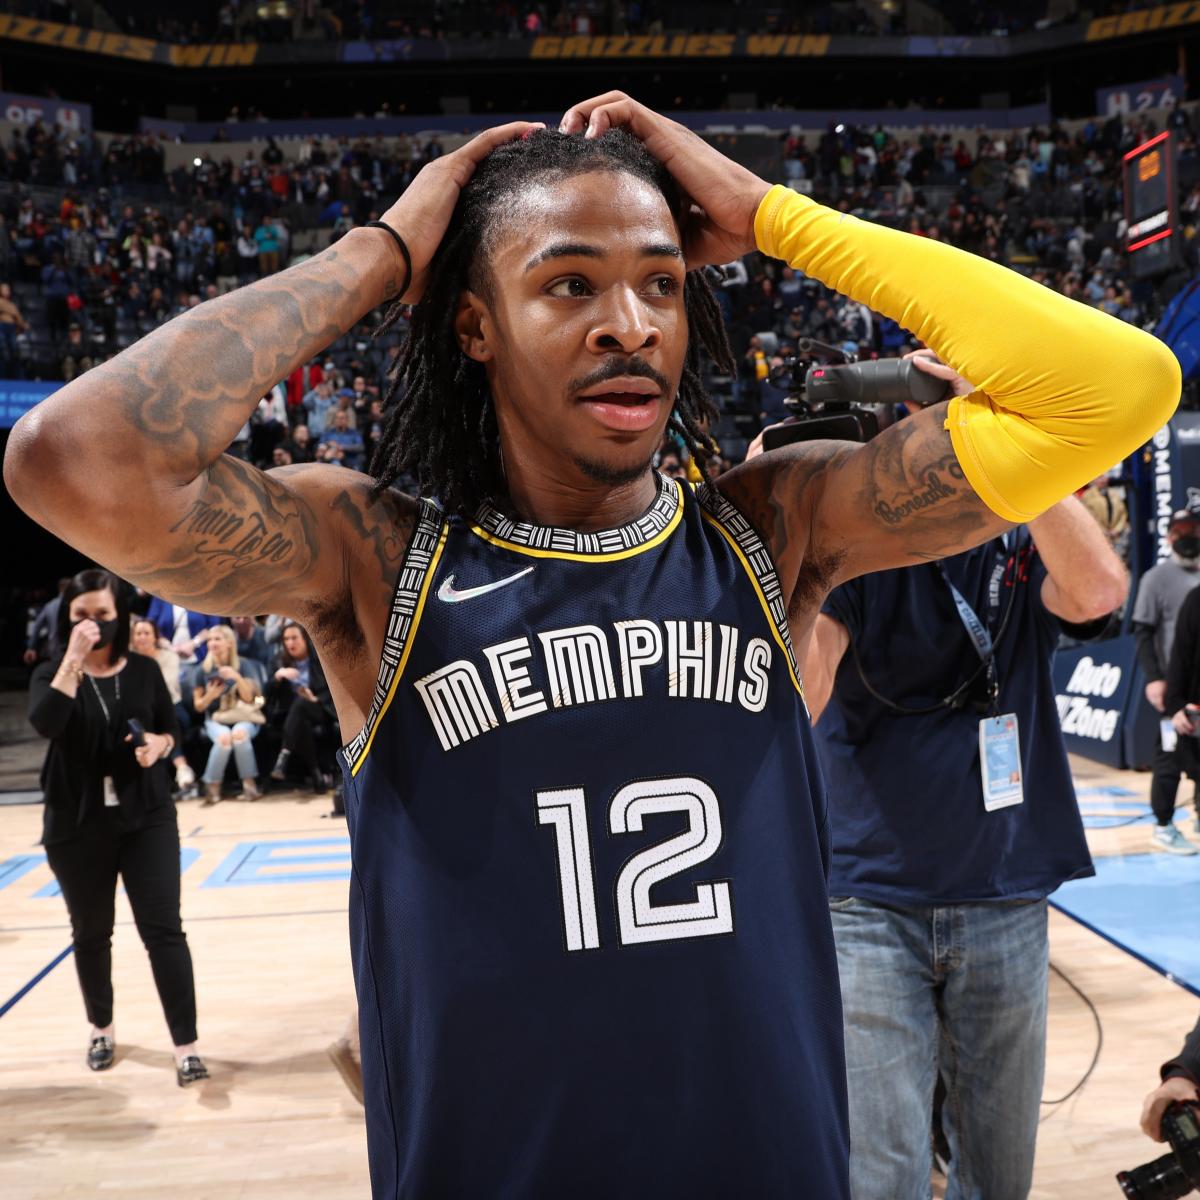 Notable moments of Ja Morant's Grizzlies career, both on and off the court